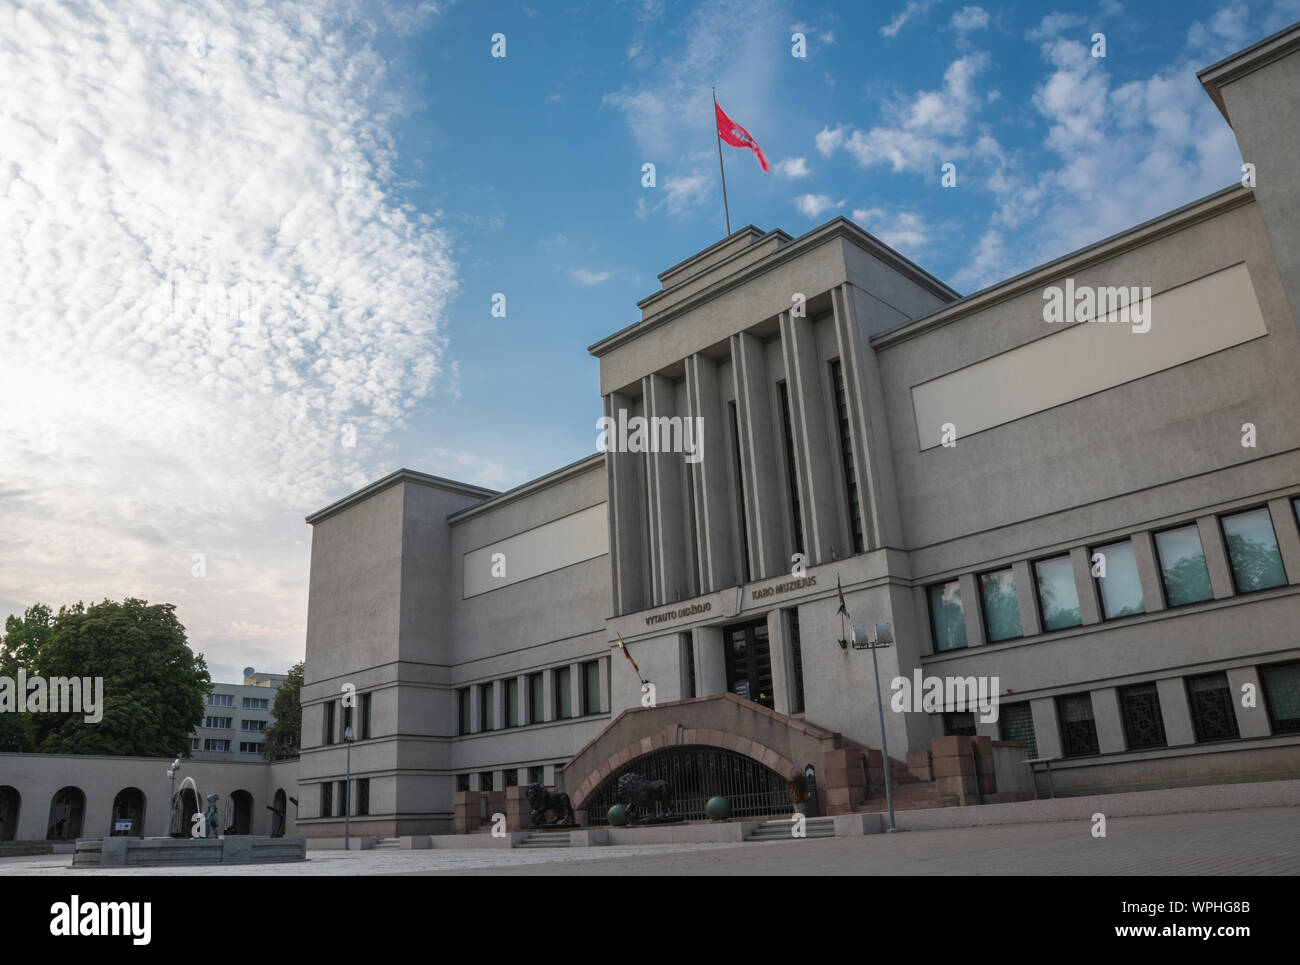 Vytautas the Great War Museum located in Kaunas, Lithuania. Stock Photo